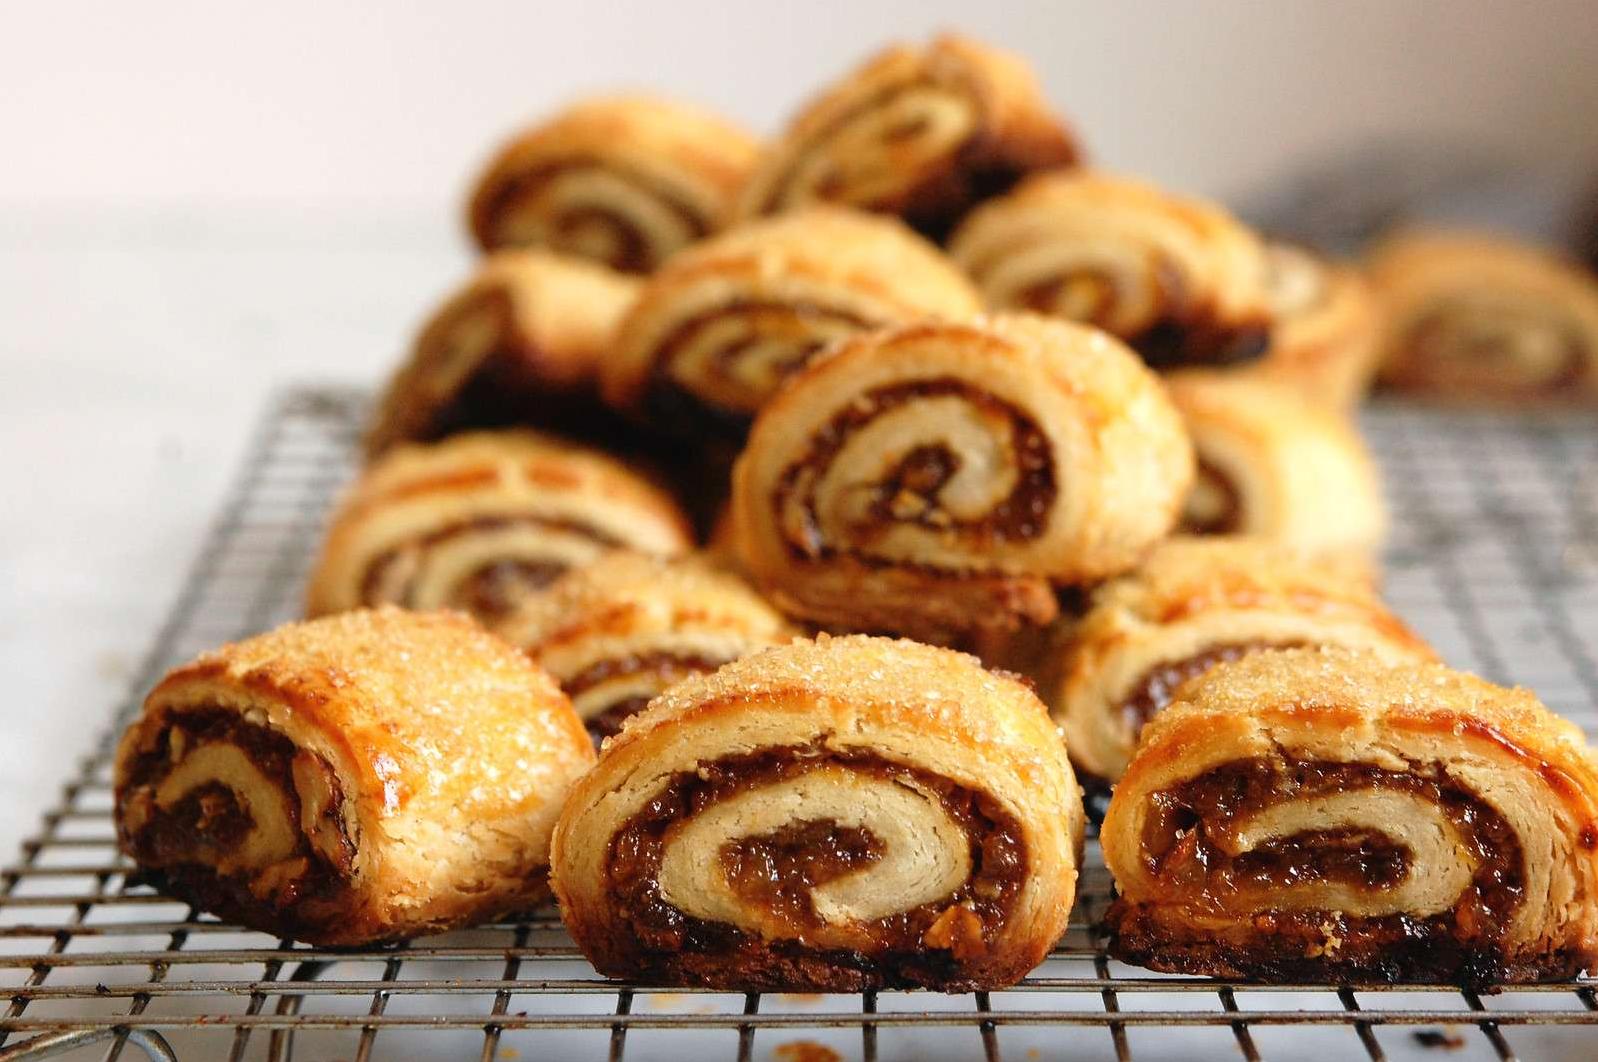  Golden brown and dusted with cinnamon sugar, these Rugelach triangles are a treat for the eyes and taste buds.